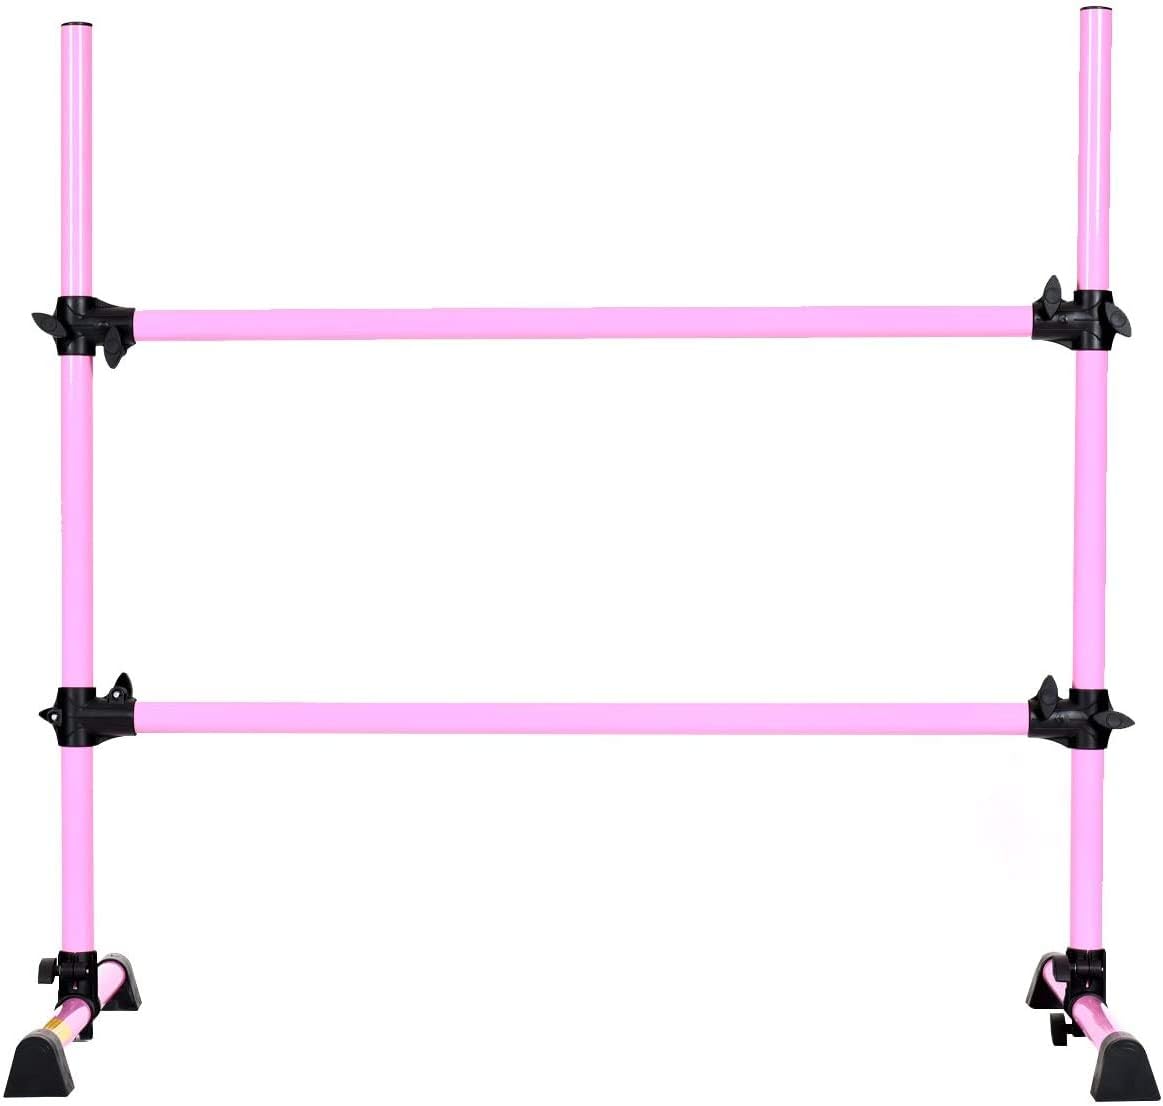 Ballet Barre Portable for Home or Studio, Height Adjustable Ballet Bar for Stretch, Pilates, Dance or Active Workouts, Double Dance Bar for Kids and Adults